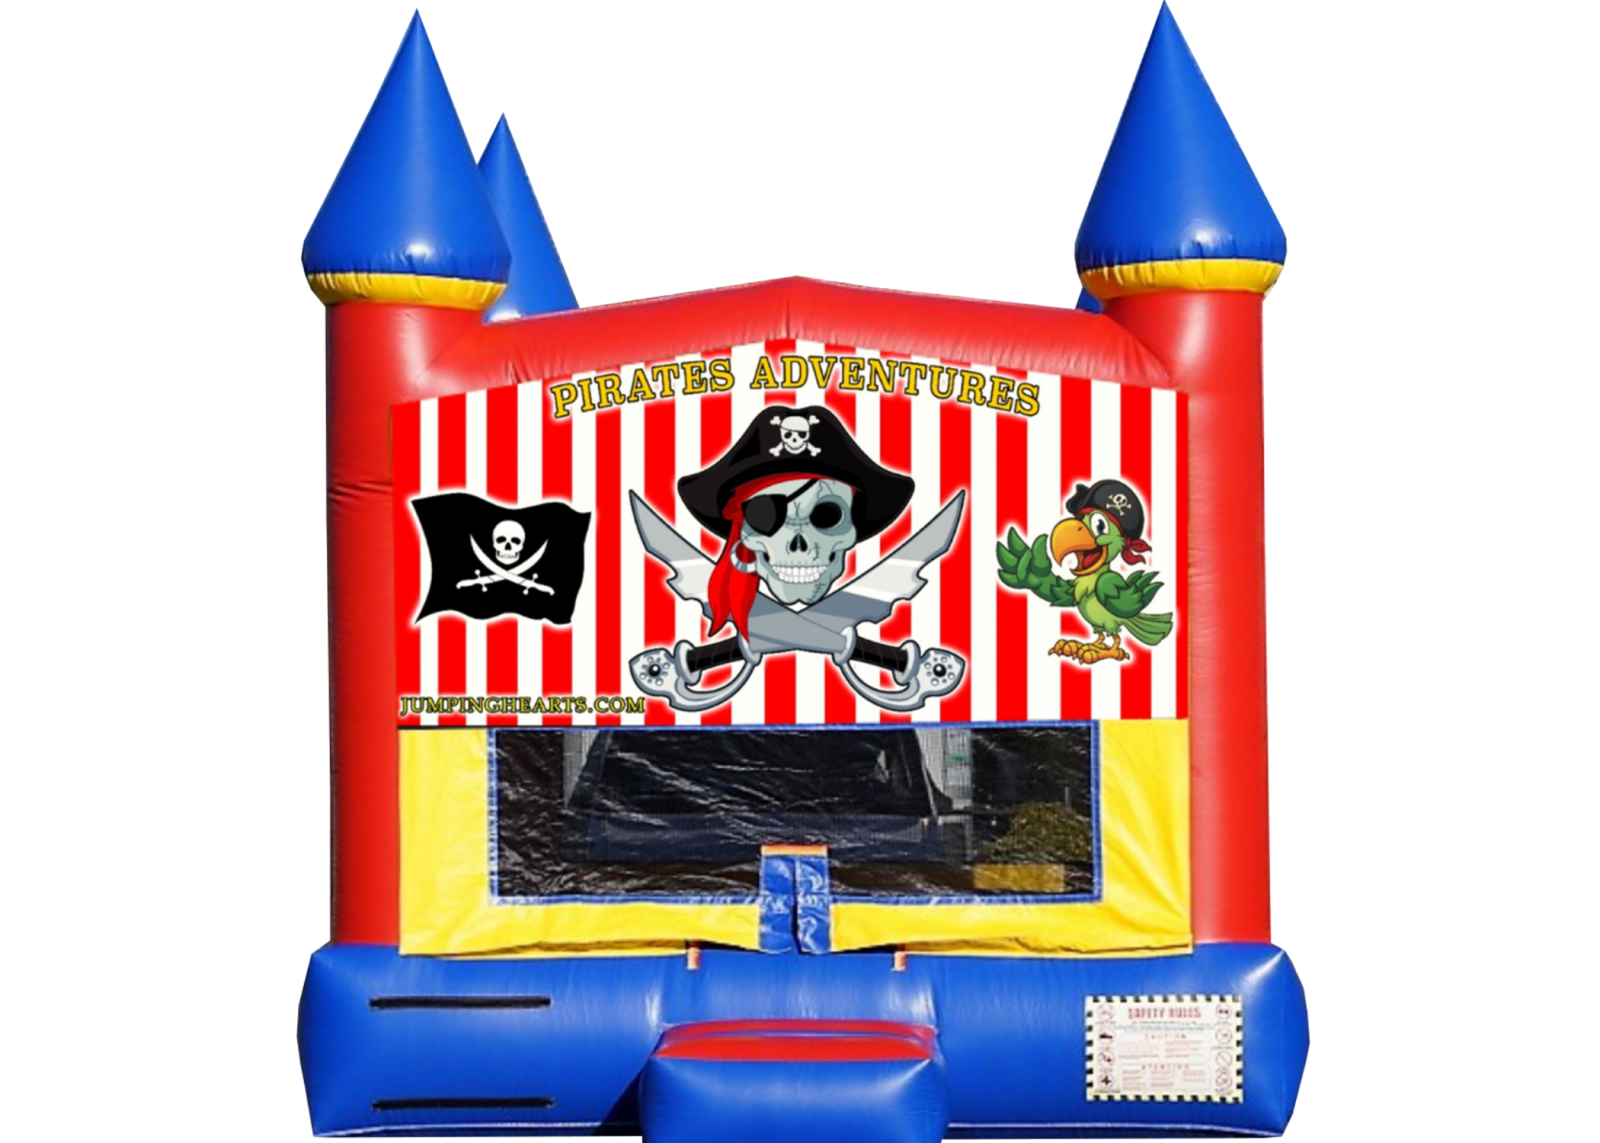 Pirate bounce house rentals Nashville, Jumping Hearts Party Rentals 615 854 1020